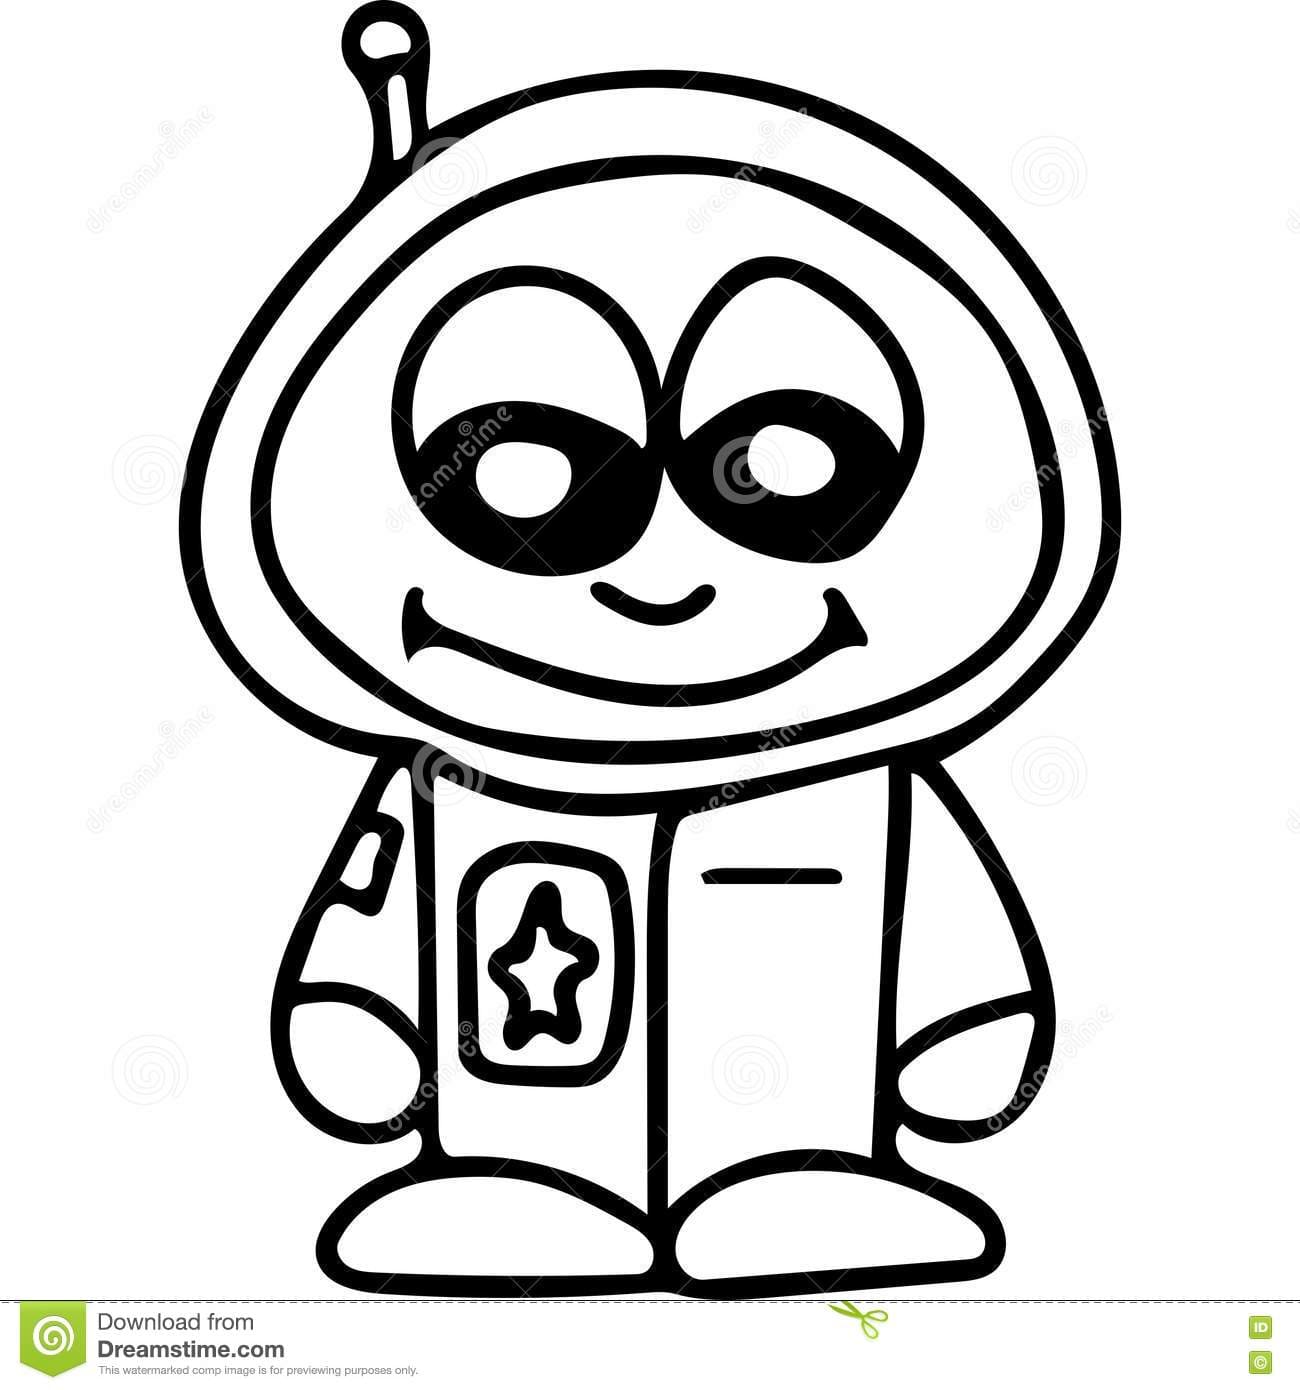 Astronaut kids coloring page